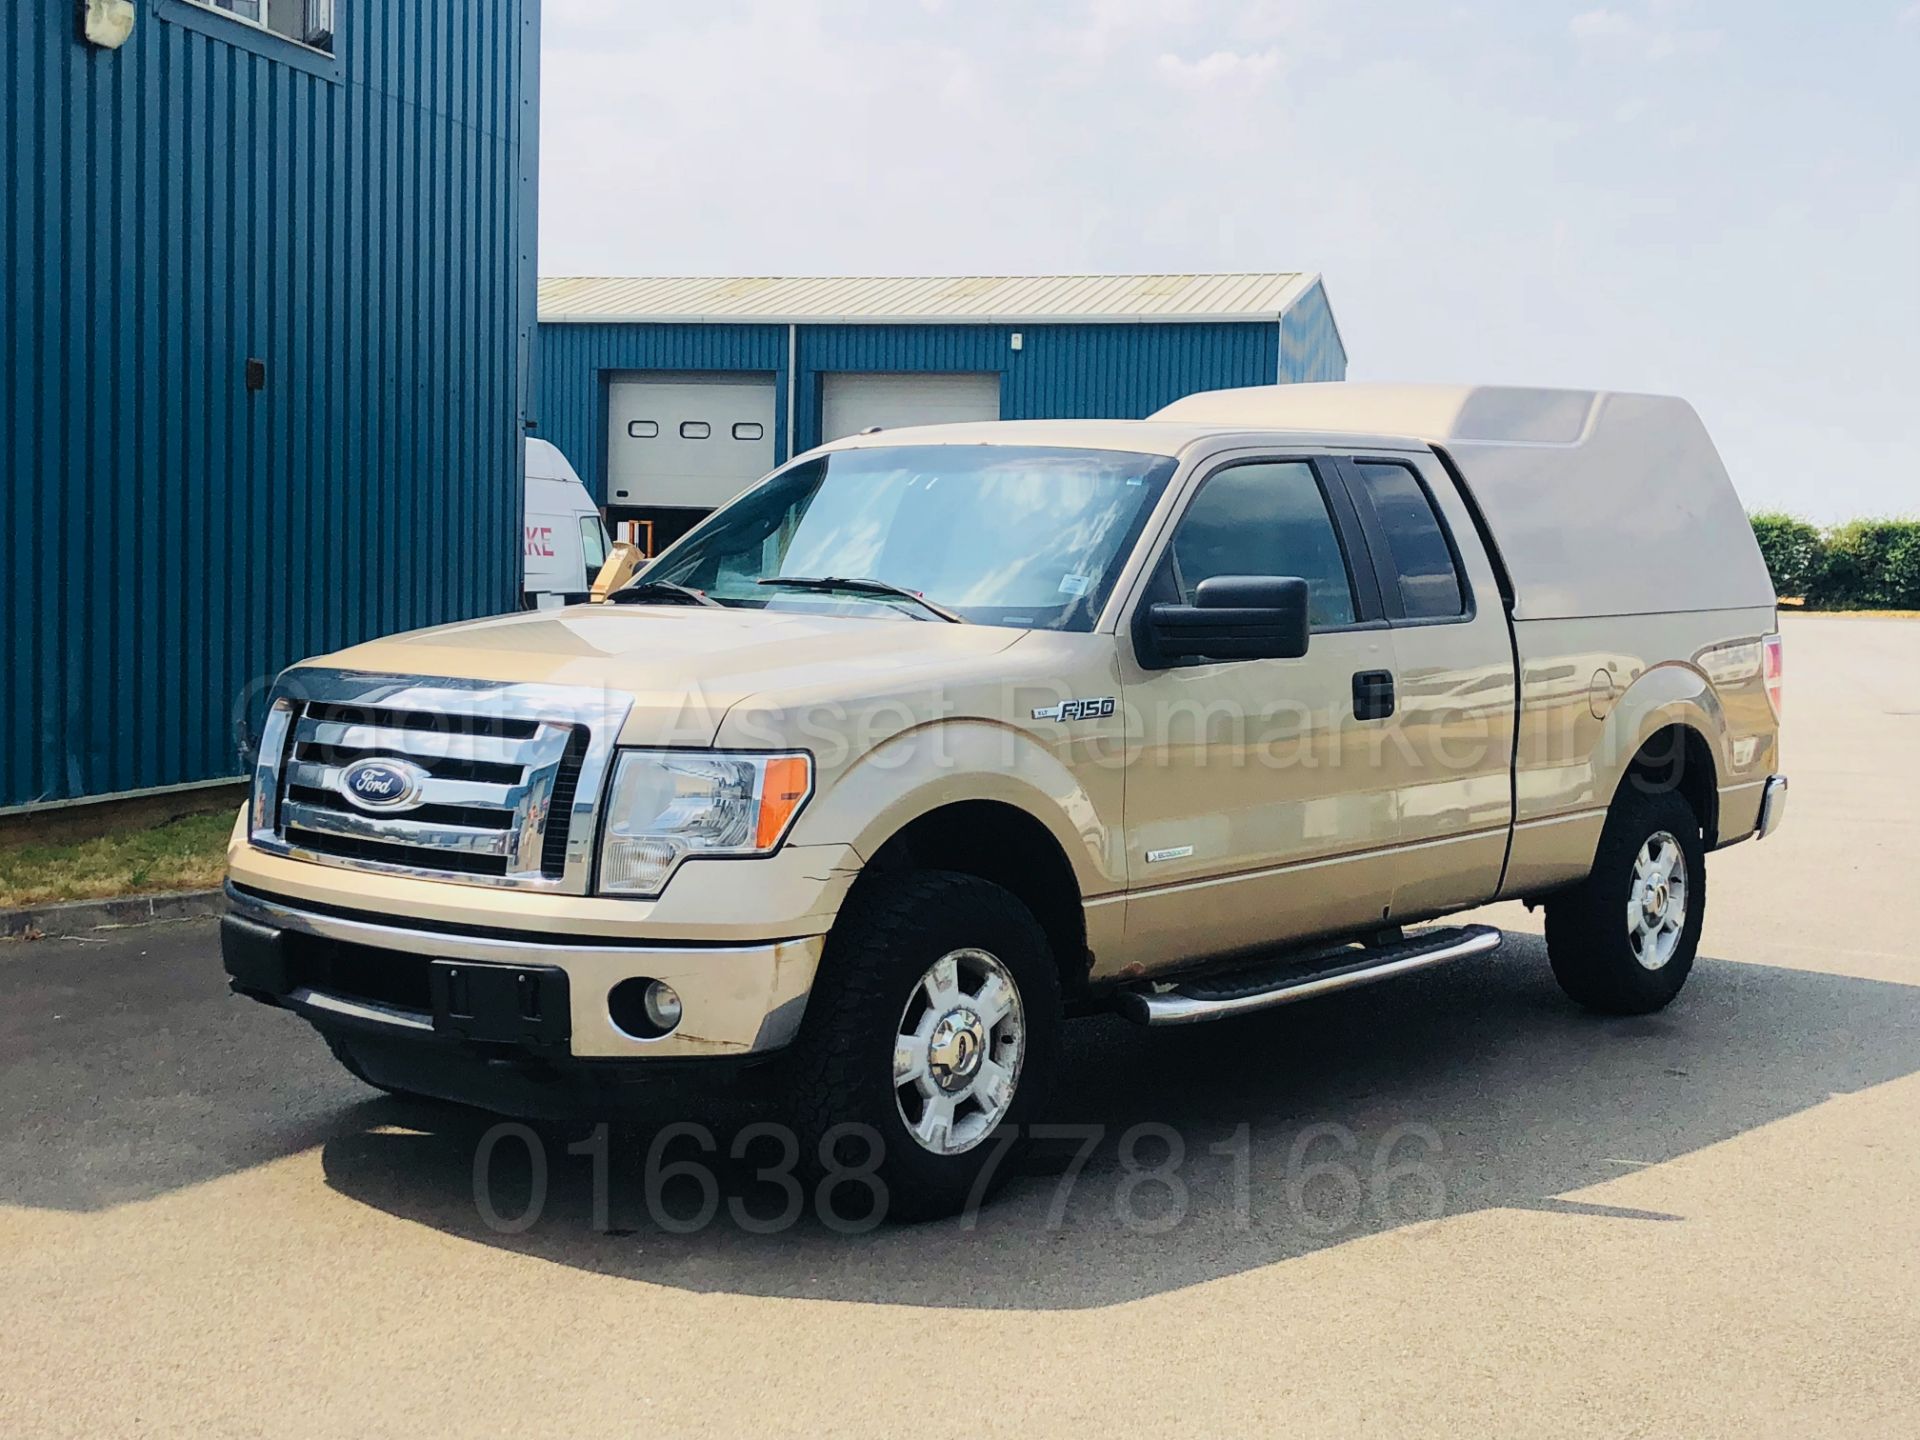 (On Sale) FORD F-150 5.4 V8 XLT EDITION KING-CAB (2012) MODEL**4X4**6 SEATER**AUTOMATIC *TOP SPEC* - Bild 2 aus 52